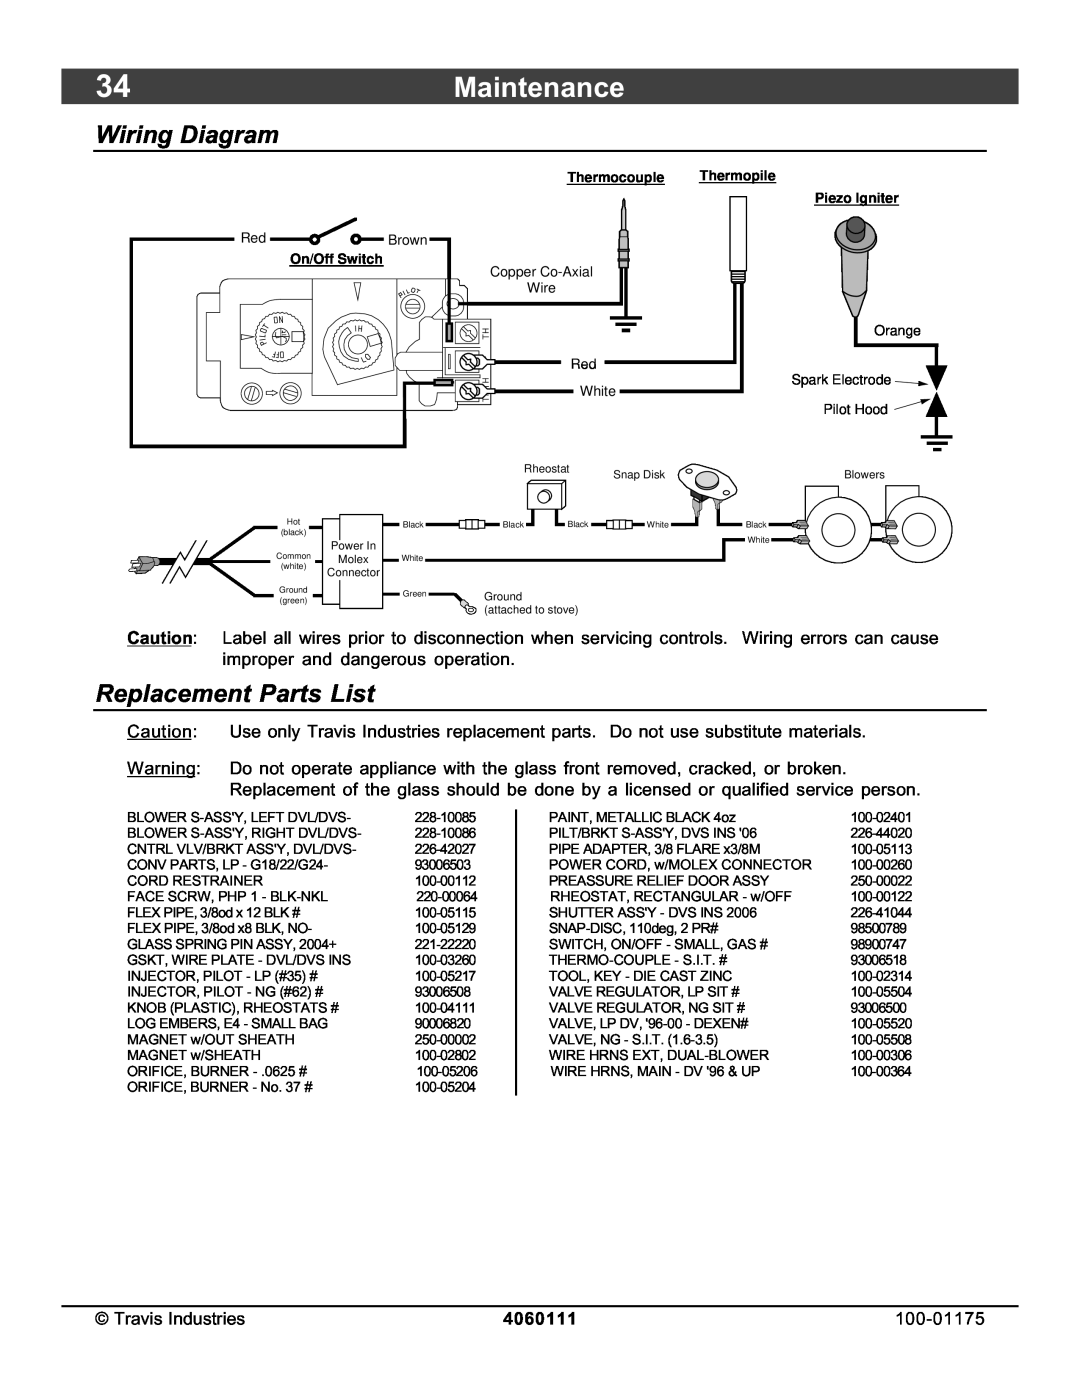 Avalon Stoves DVS Insert EF II owner manual 34Maintenance, Wiring Diagram, Replacement Parts List, 4060111 